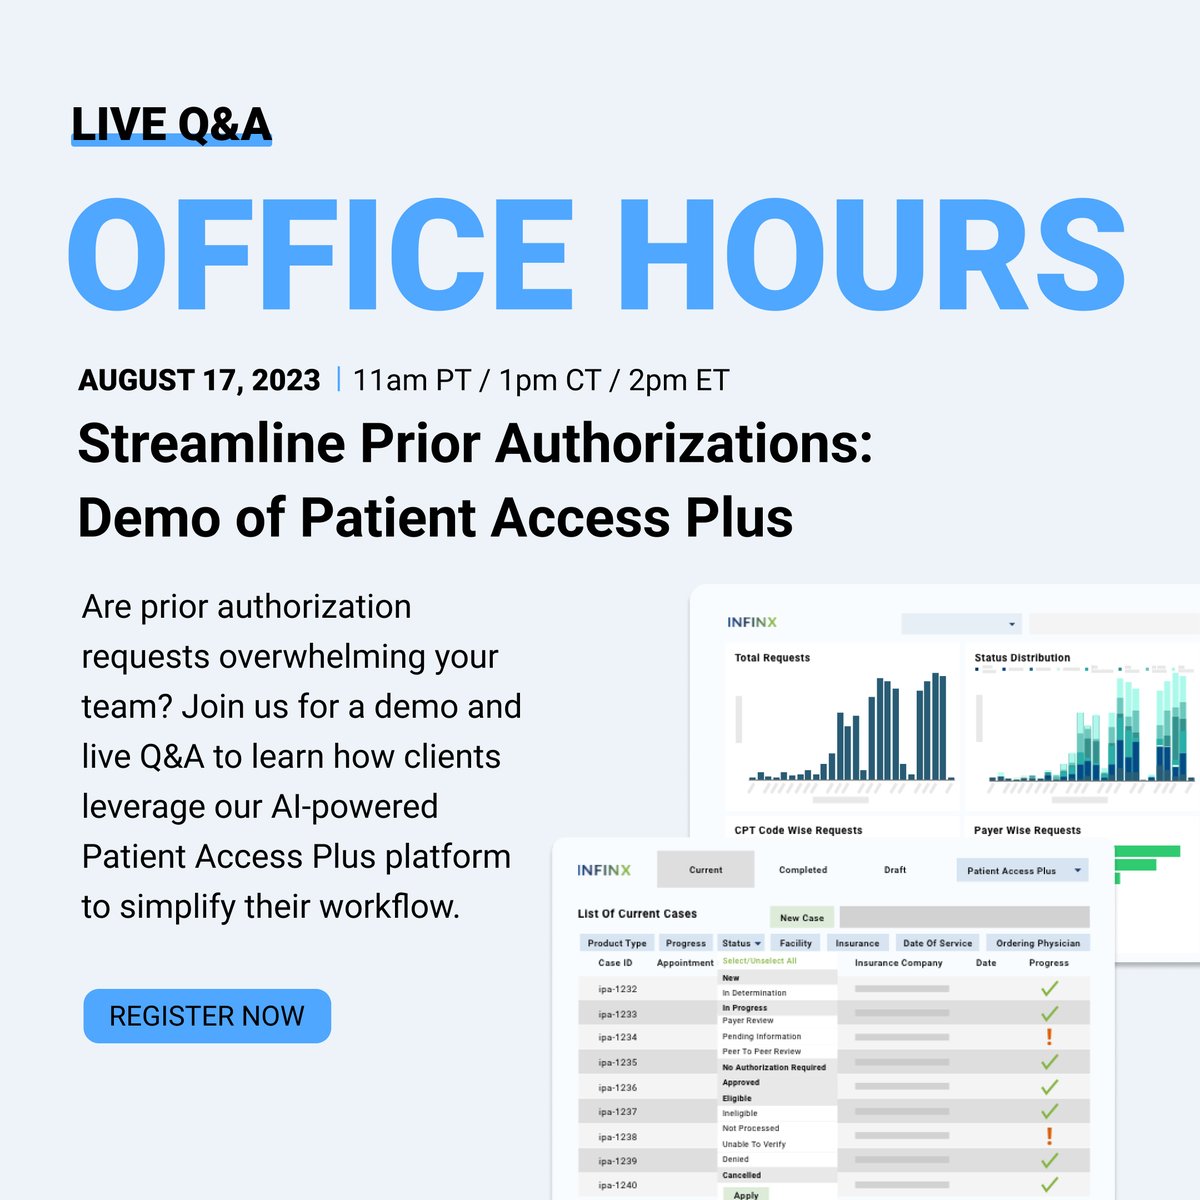 Starting soon! Today’s office hours present a firsthand look at our Patient Access Plus platform.

Register to attend: hubs.li/Q01_lqGt0

#PatientAccessPlusDemo #InfinxOfficeHours #PriorAuthorization #PriorAuthTech #PatientAccessAutomation